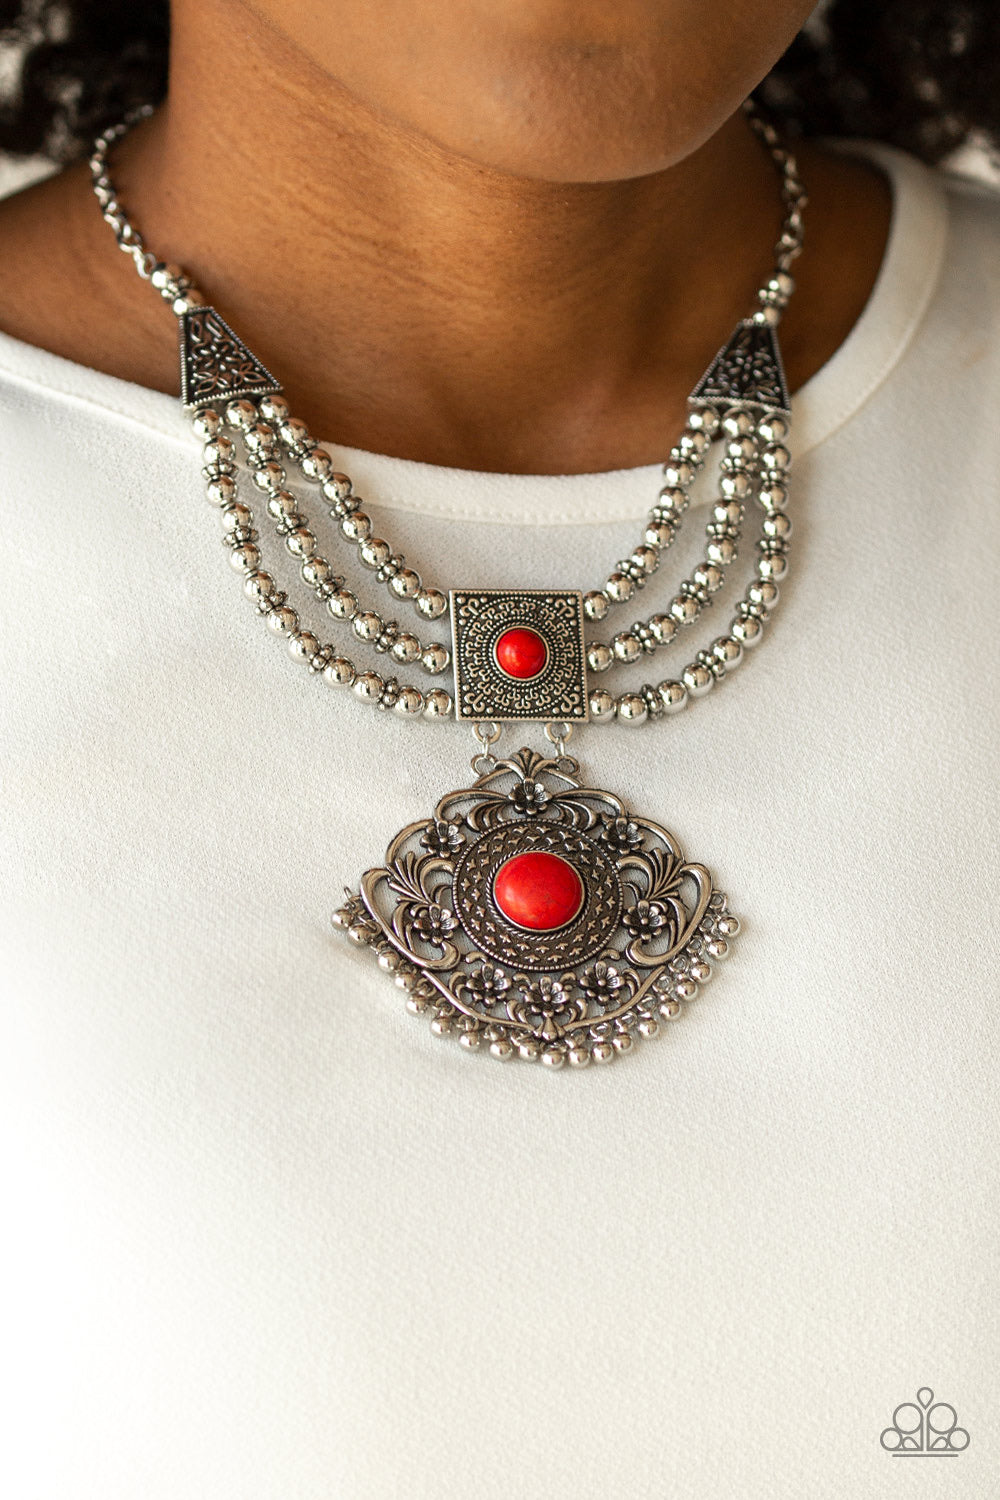 Paparazzi Jewelry Necklace Santa Fe Solstice - Red